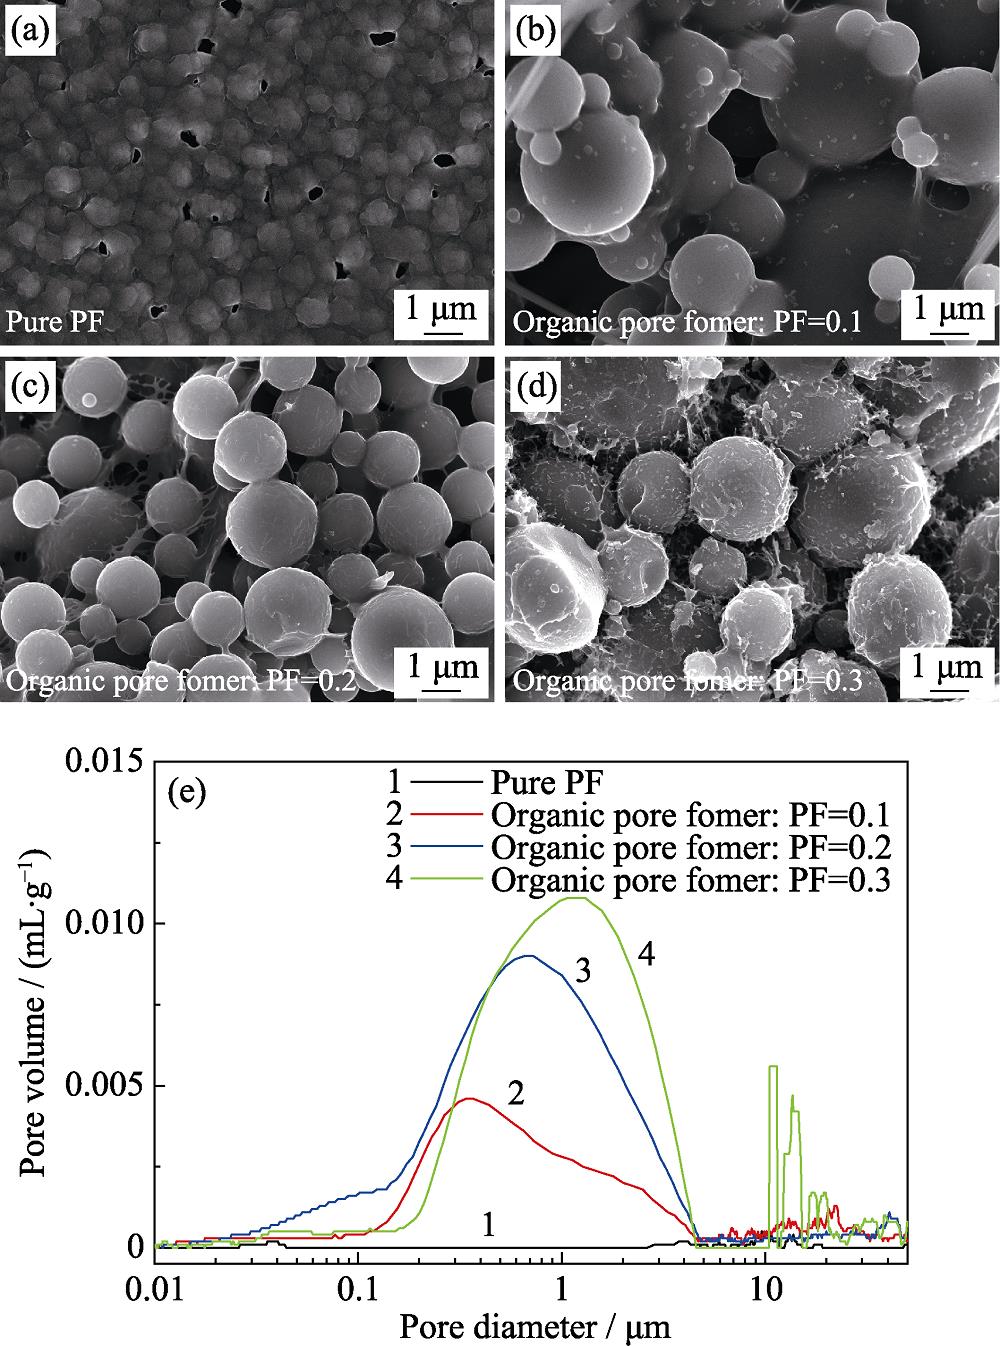 SEM images of pyrolytic carbon prepared with different organic pore former contents ((a) Pure PF; (b) Organic pore former: PF=0.1; (c) Organic pore former: PF=0.2, (d) Organic pore former: PF=0.3); (e) Pore size distribution of pyrolytic carbon